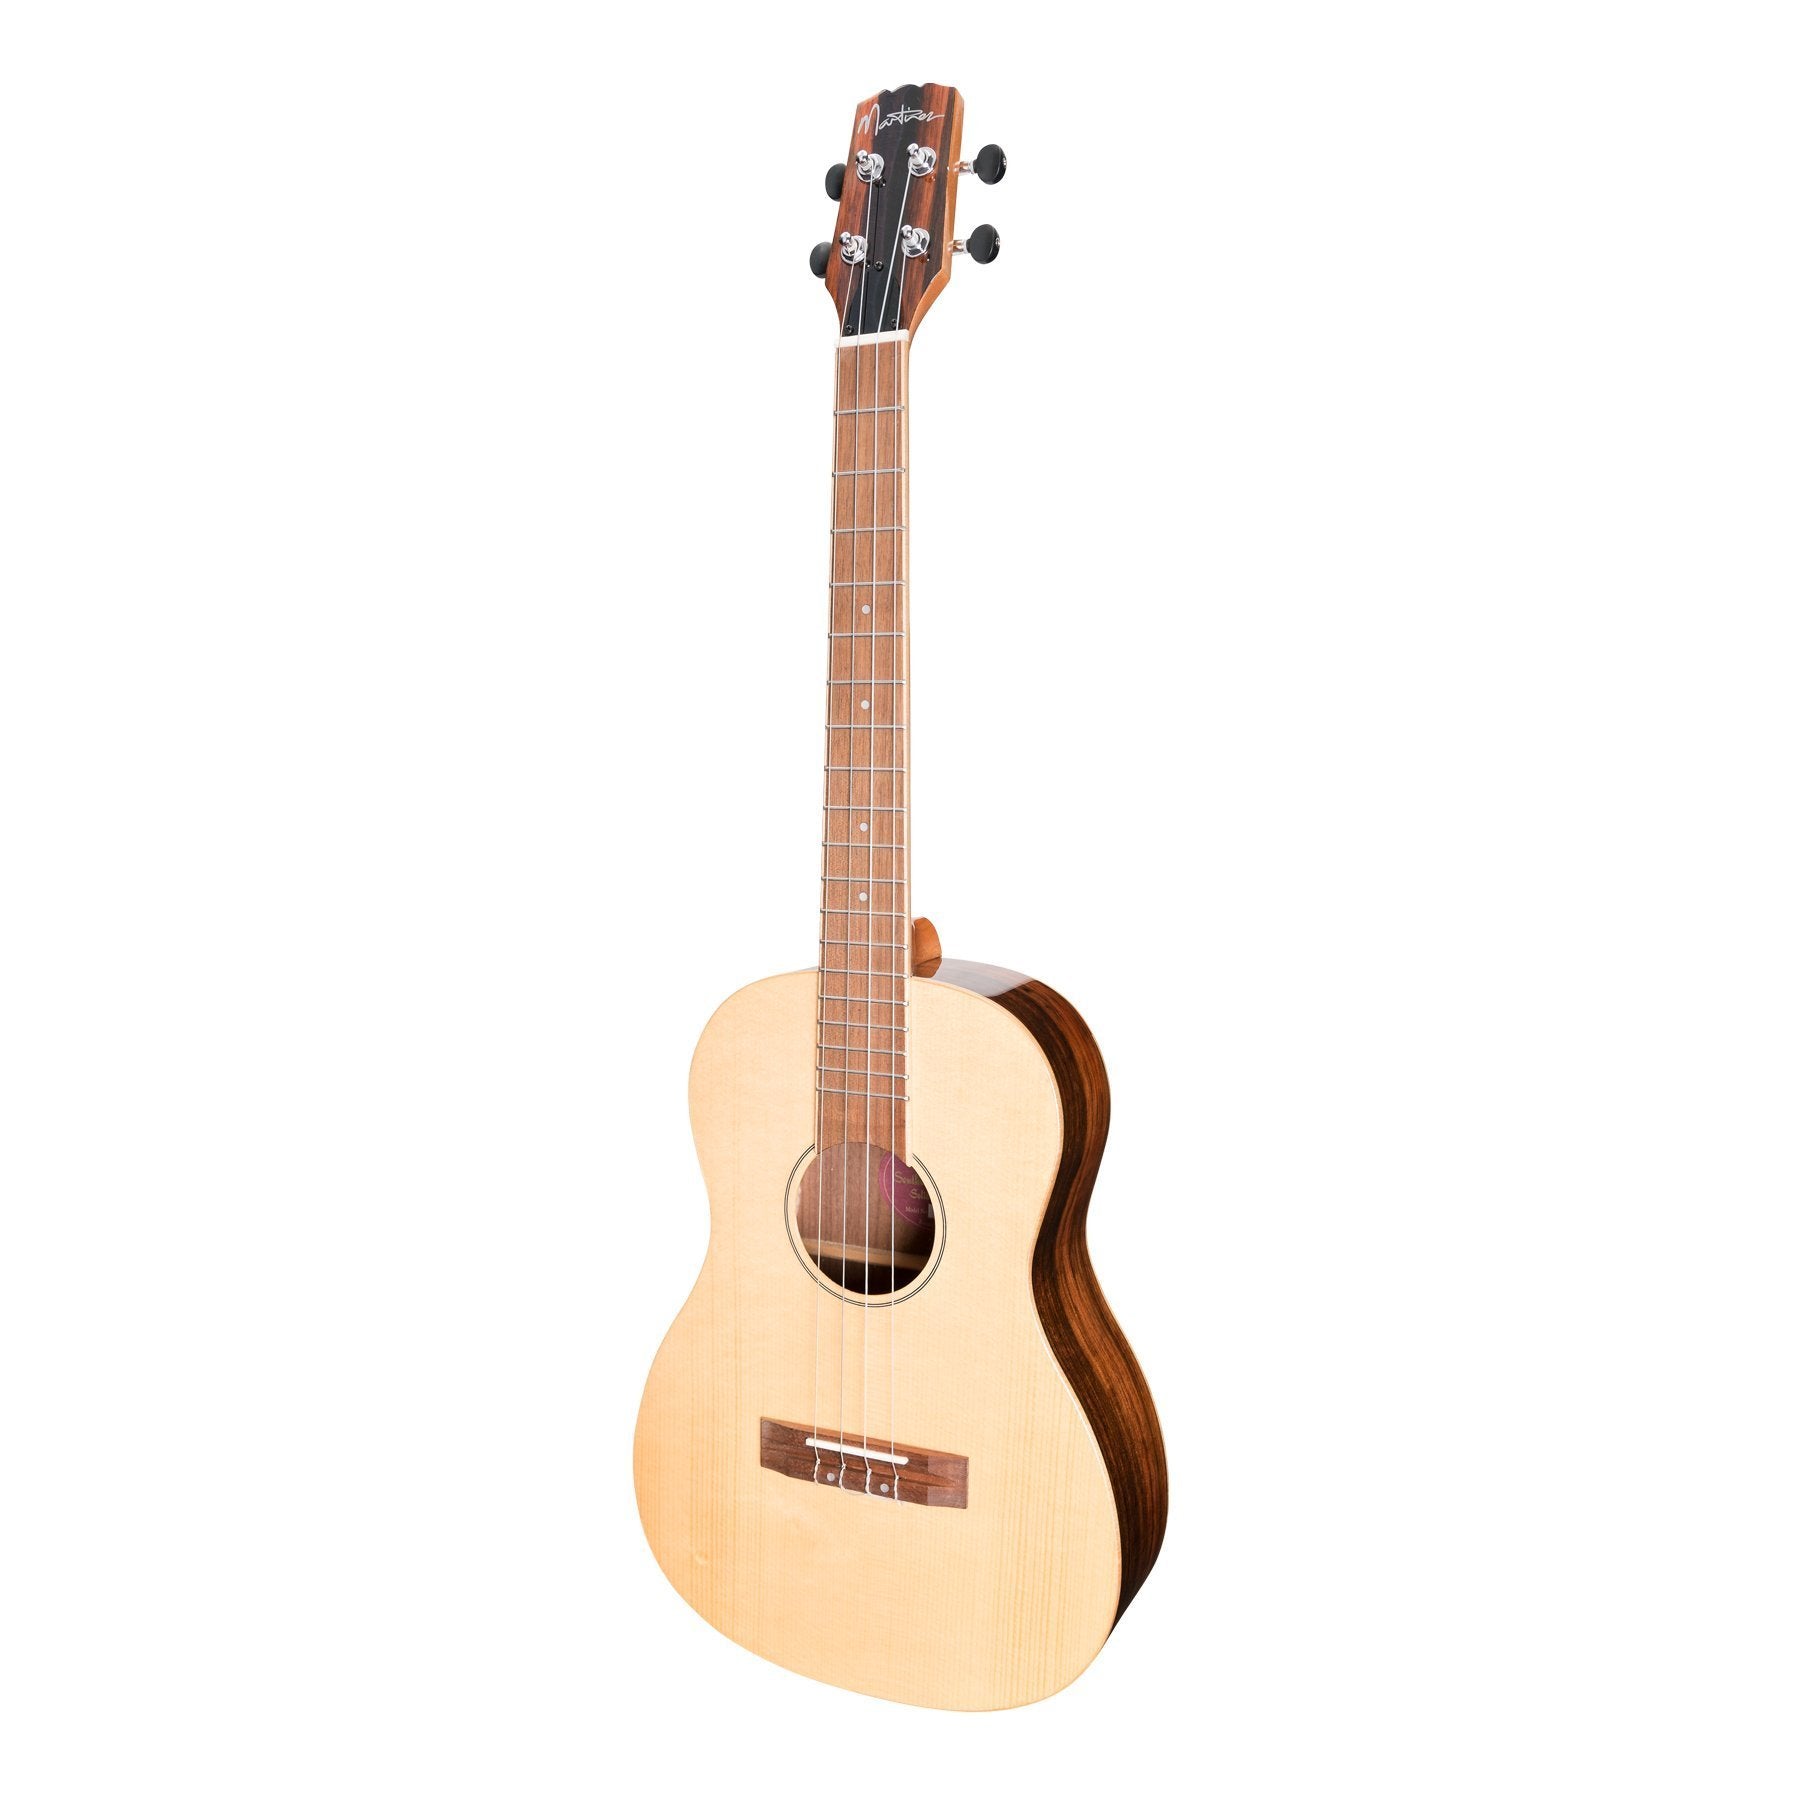 Martinez 'Southern Belle 7 Series' Spruce Solid Top Electric Baritone Ukulele with Hard Case (Natural Gloss)-MSBB-7-NGL